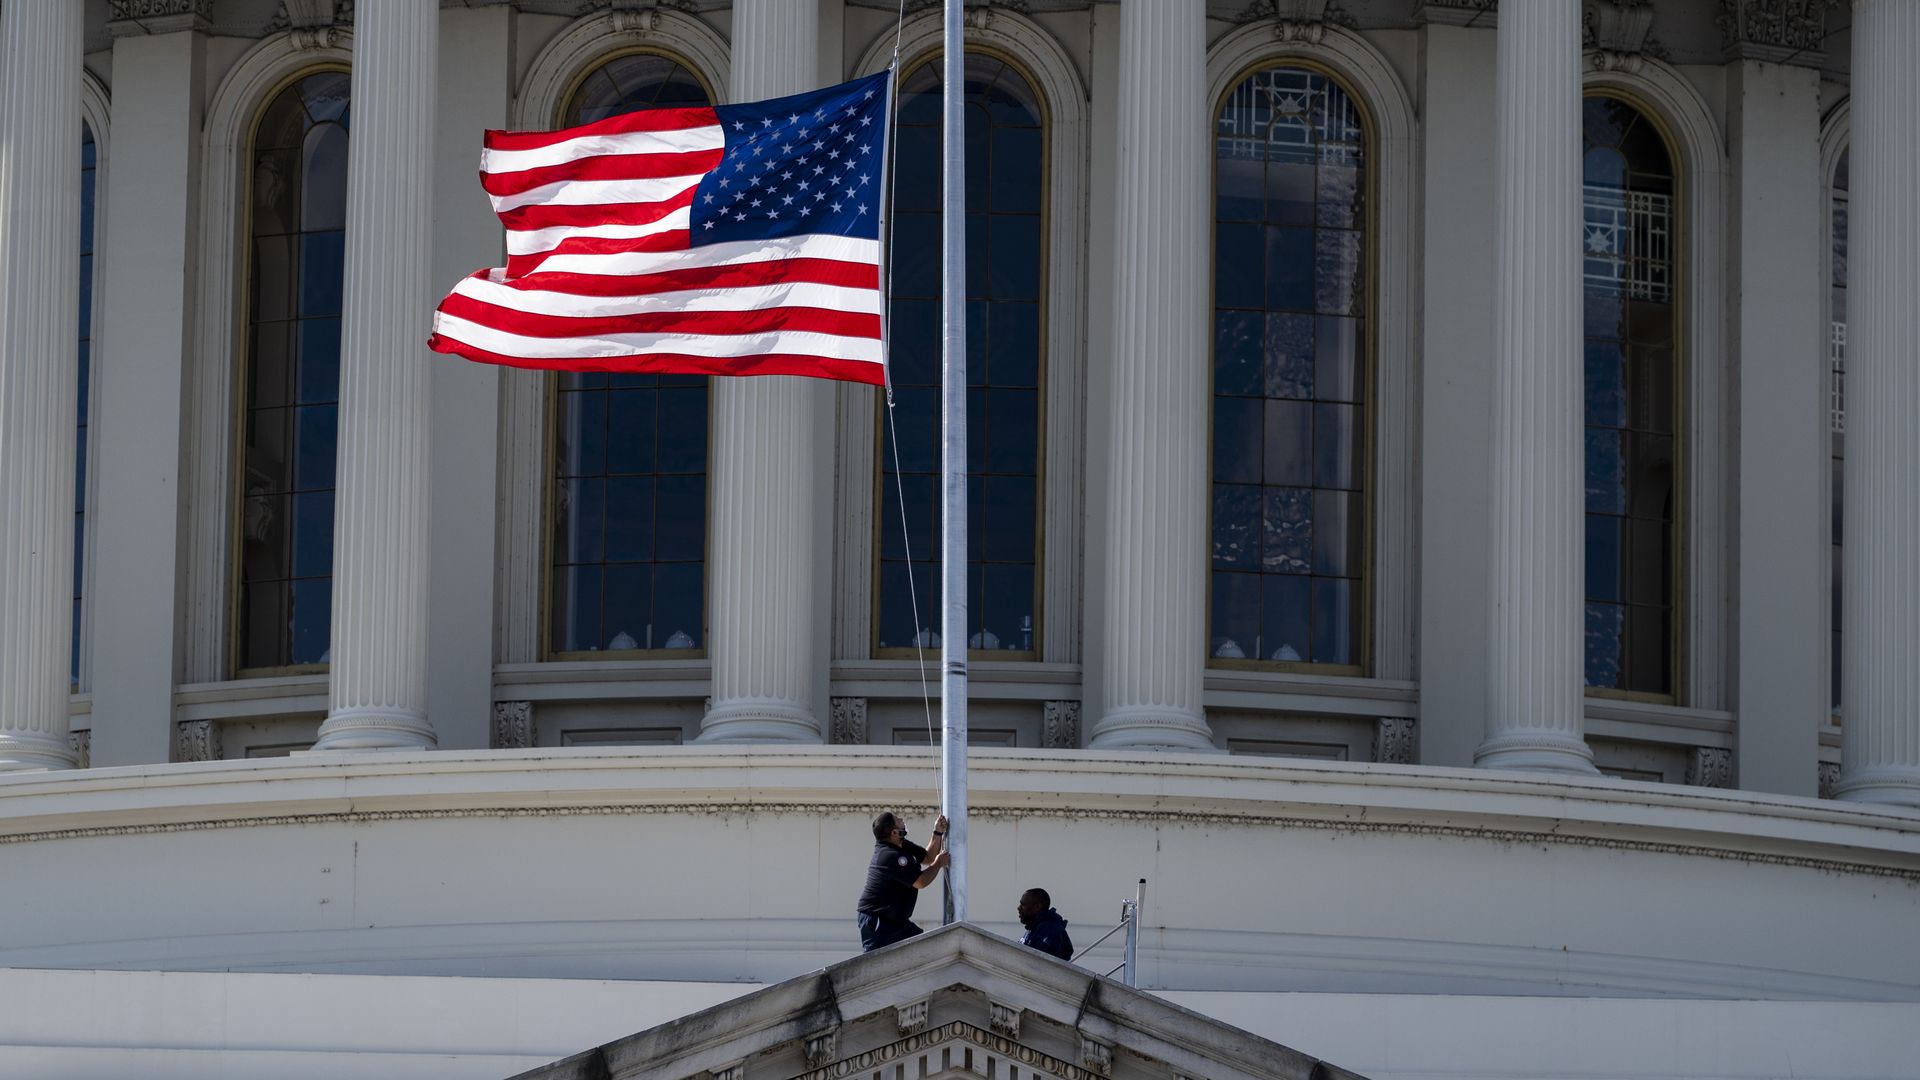 Workers are seen lowering a flag at the U.S. Capitol to honor Colin Powell.